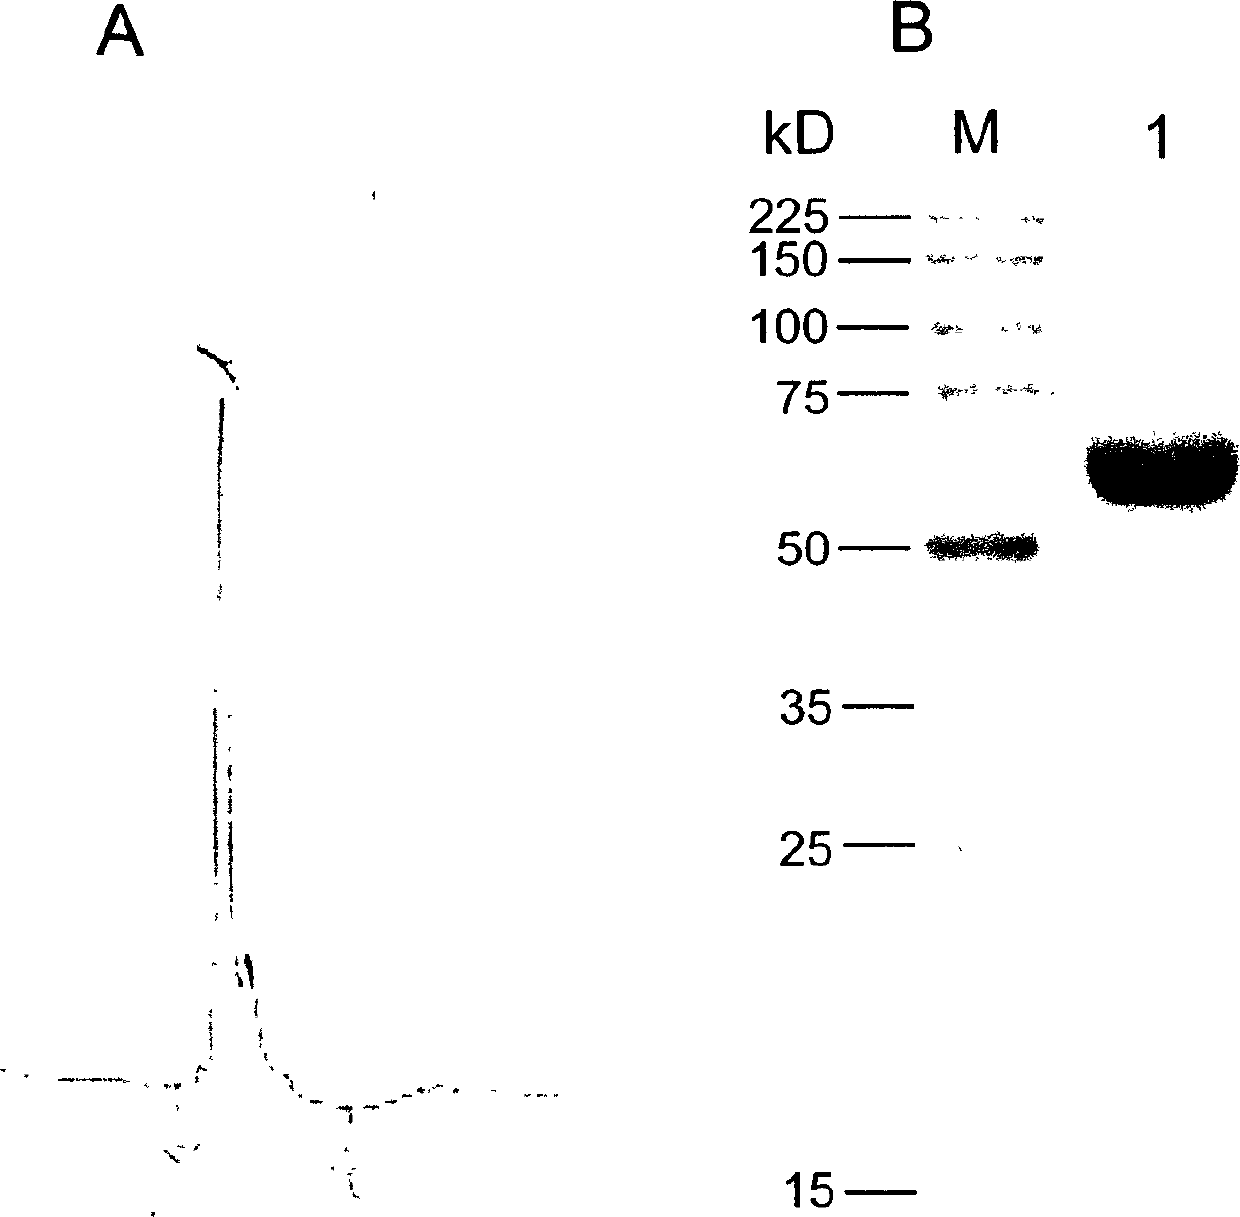 Related gene and protein for preventing and treating Japanese blood fluke infection, and its uses